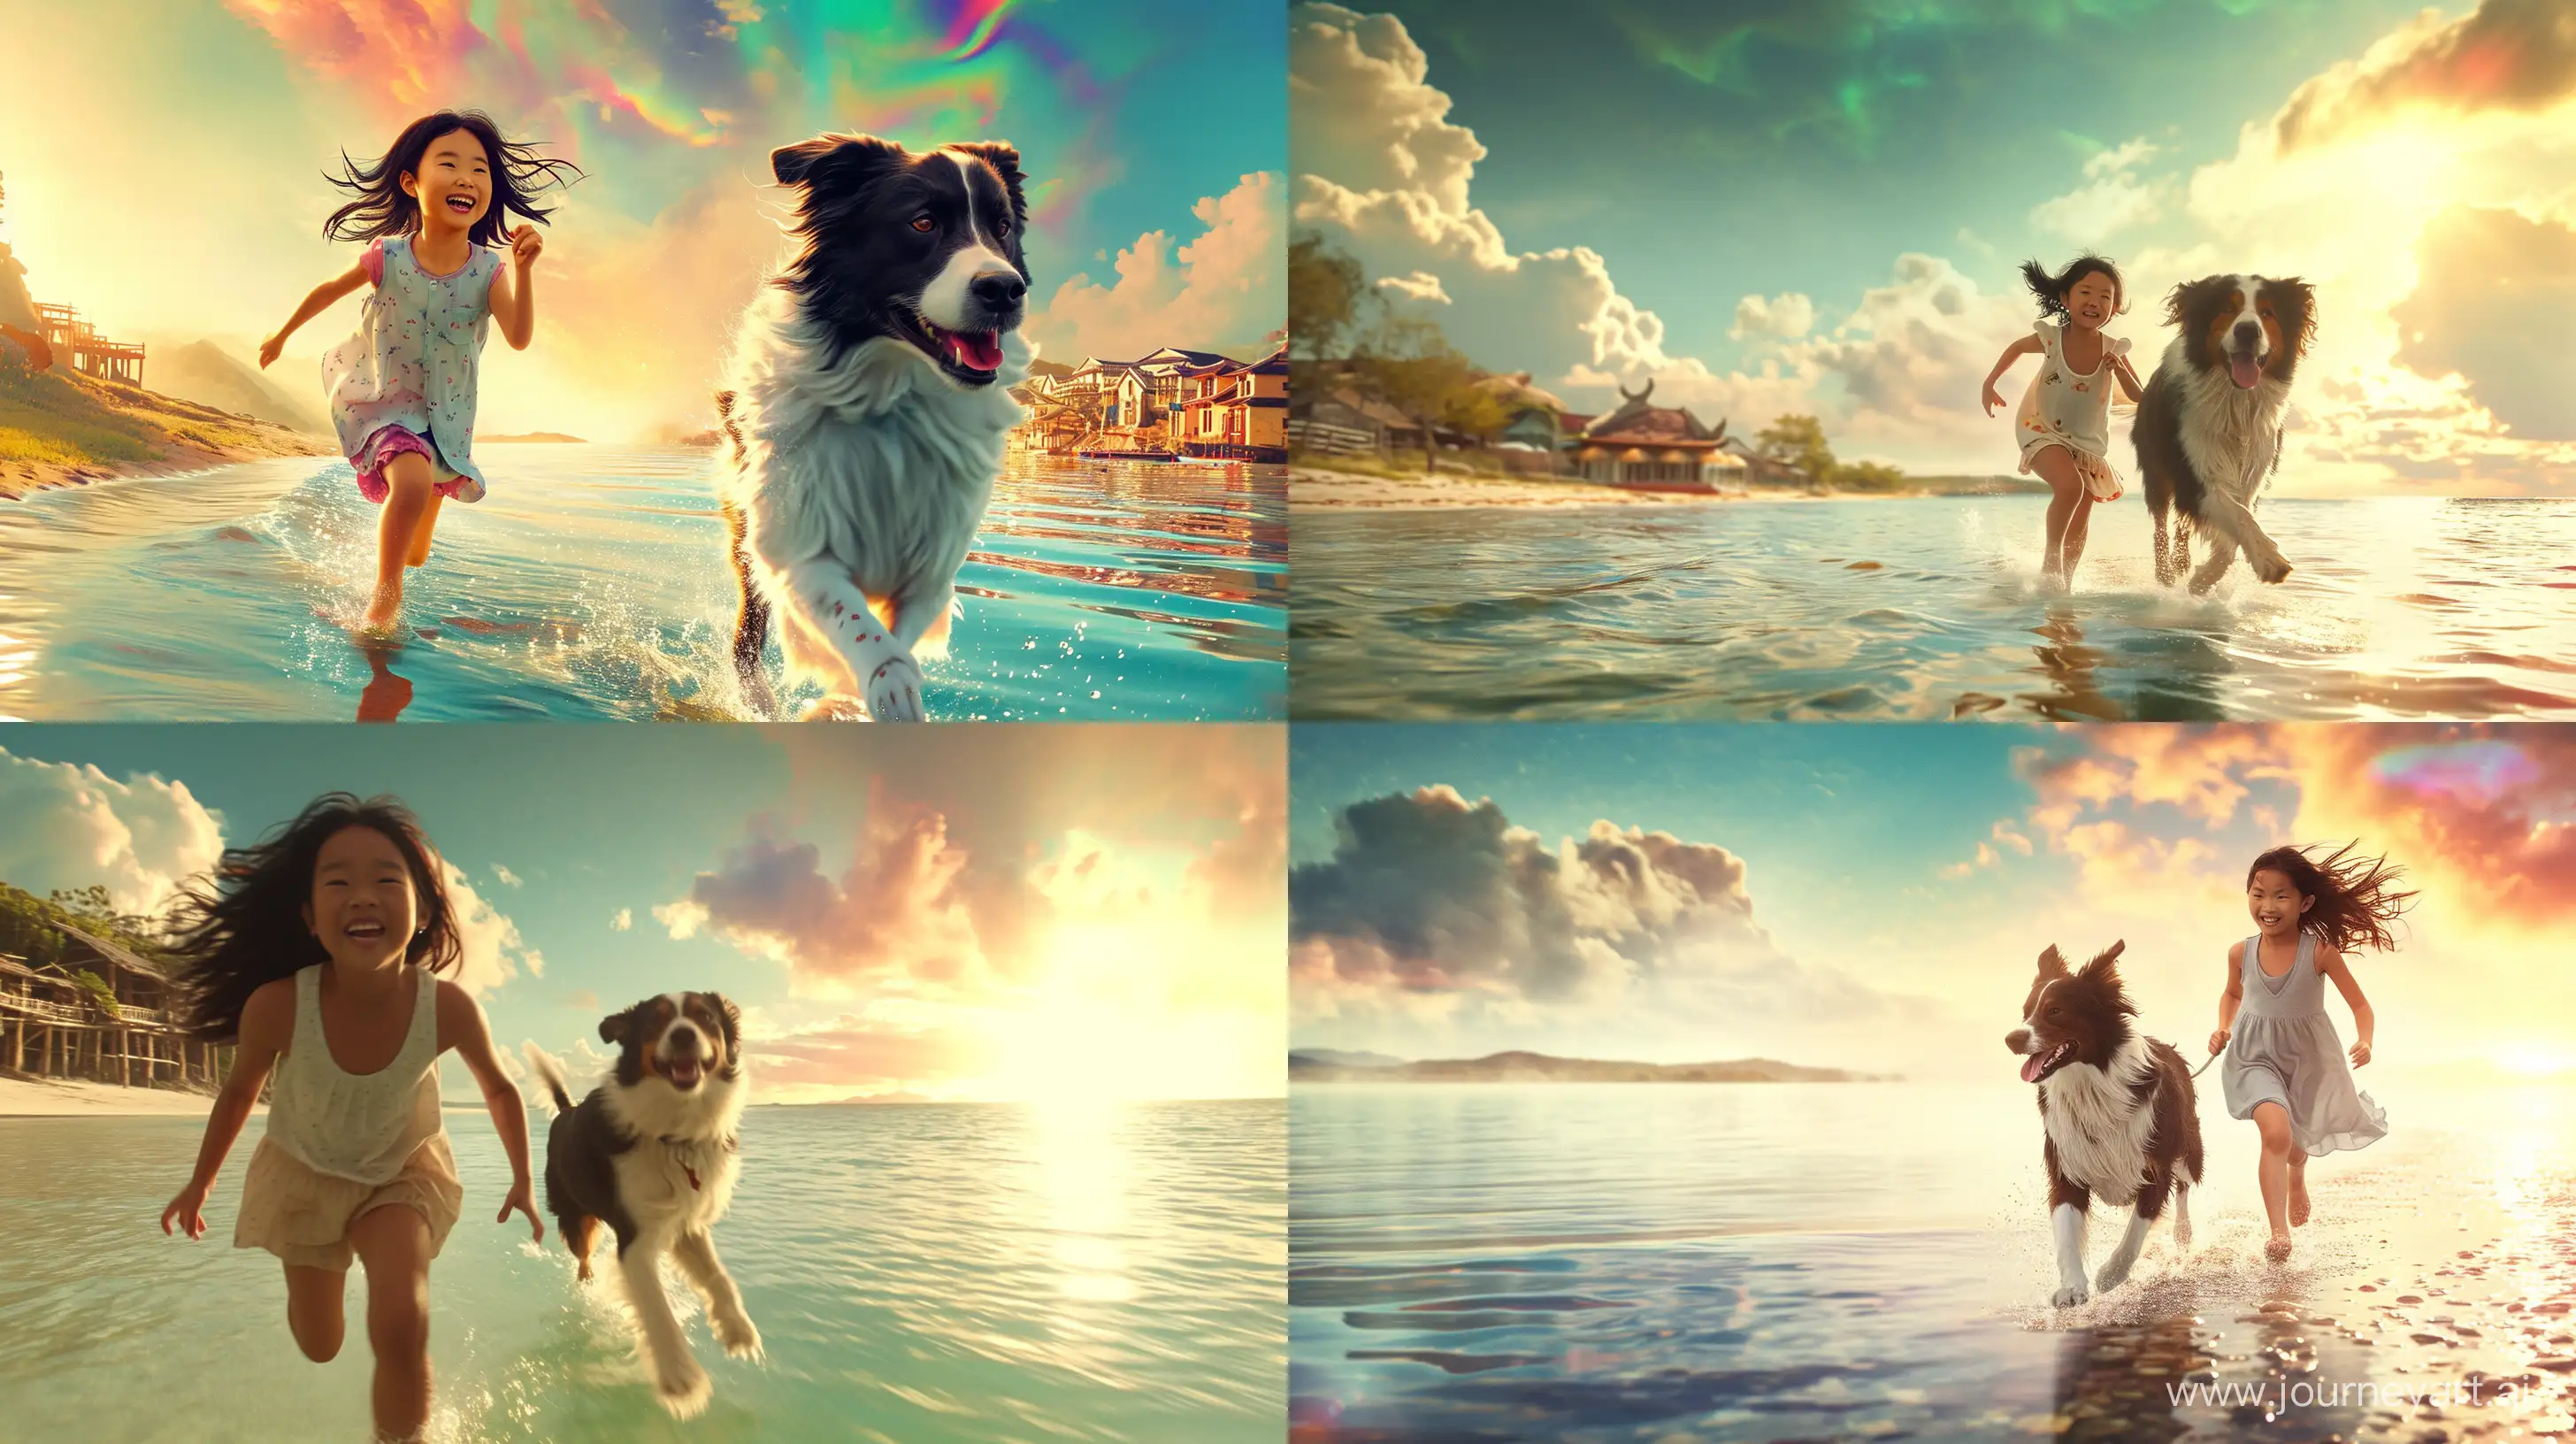 /imagine prompt: Scene 1 - Evelyn, a 12-year-old Asian girl, and her wise old Border Collie, Enzo, exploring crystal-clear lakes and the vast ocean beside her quaint village in Azura, a mystical land where the sky shimmers with iridescent hues and waters sparkle like liquid sapphire. Visualize a serene, picturesque setting with Evelyn joyfully running along the water's edge, Enzo loyally following, against a backdrop of shimmering waters and vibrant skies. Composition should capture the essence of adventure and wonder, with bright, warm lighting and a wide-angle view to encompass the expanse of the landscape. Mood is joyful and full of youthful curiosity. --v 6 --style raw --ar 16:9